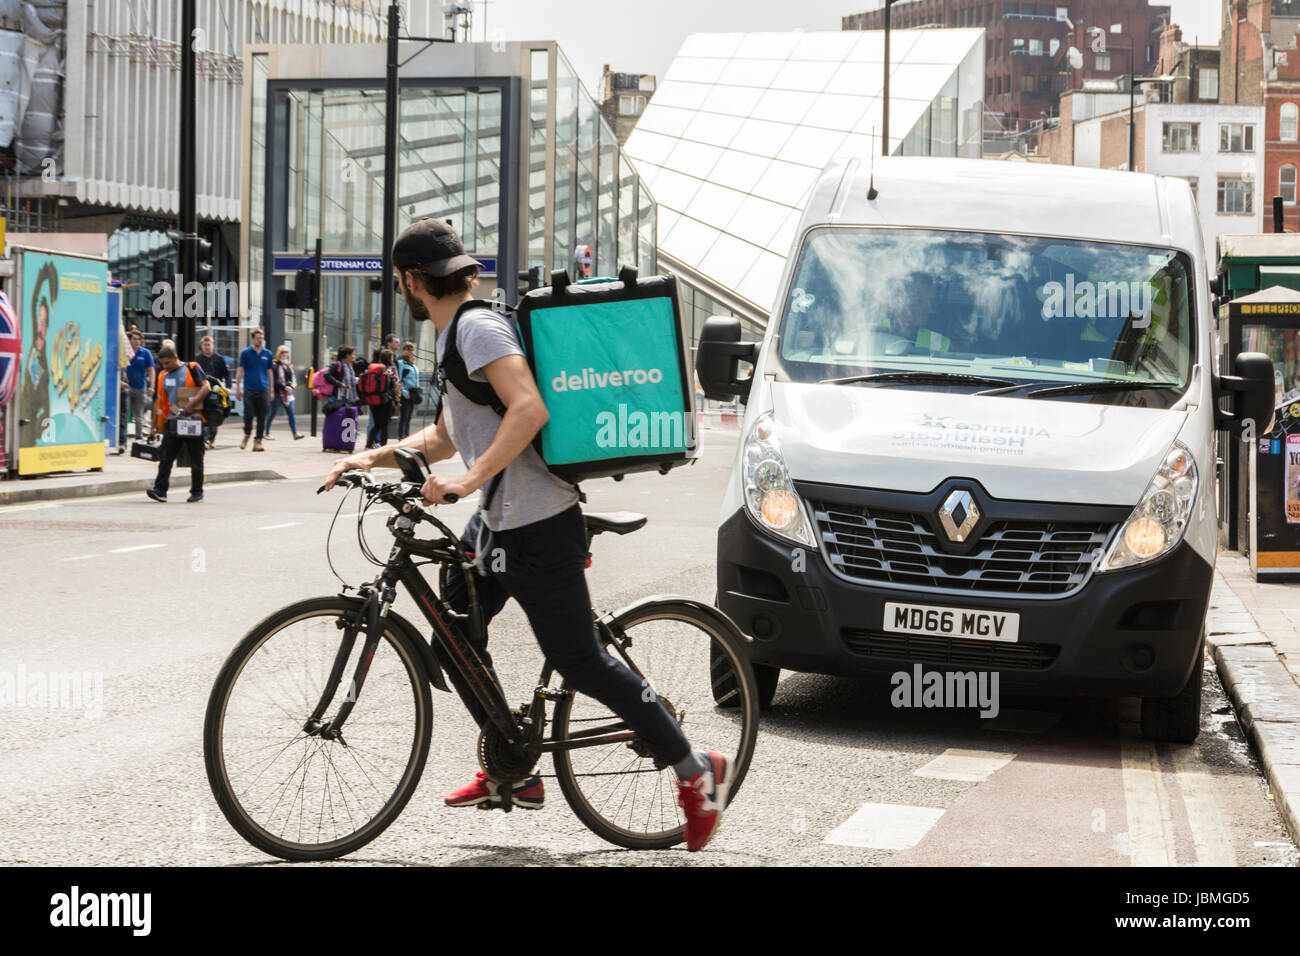 A Deliveroo rider on his bike in central London, UK Stock Photo